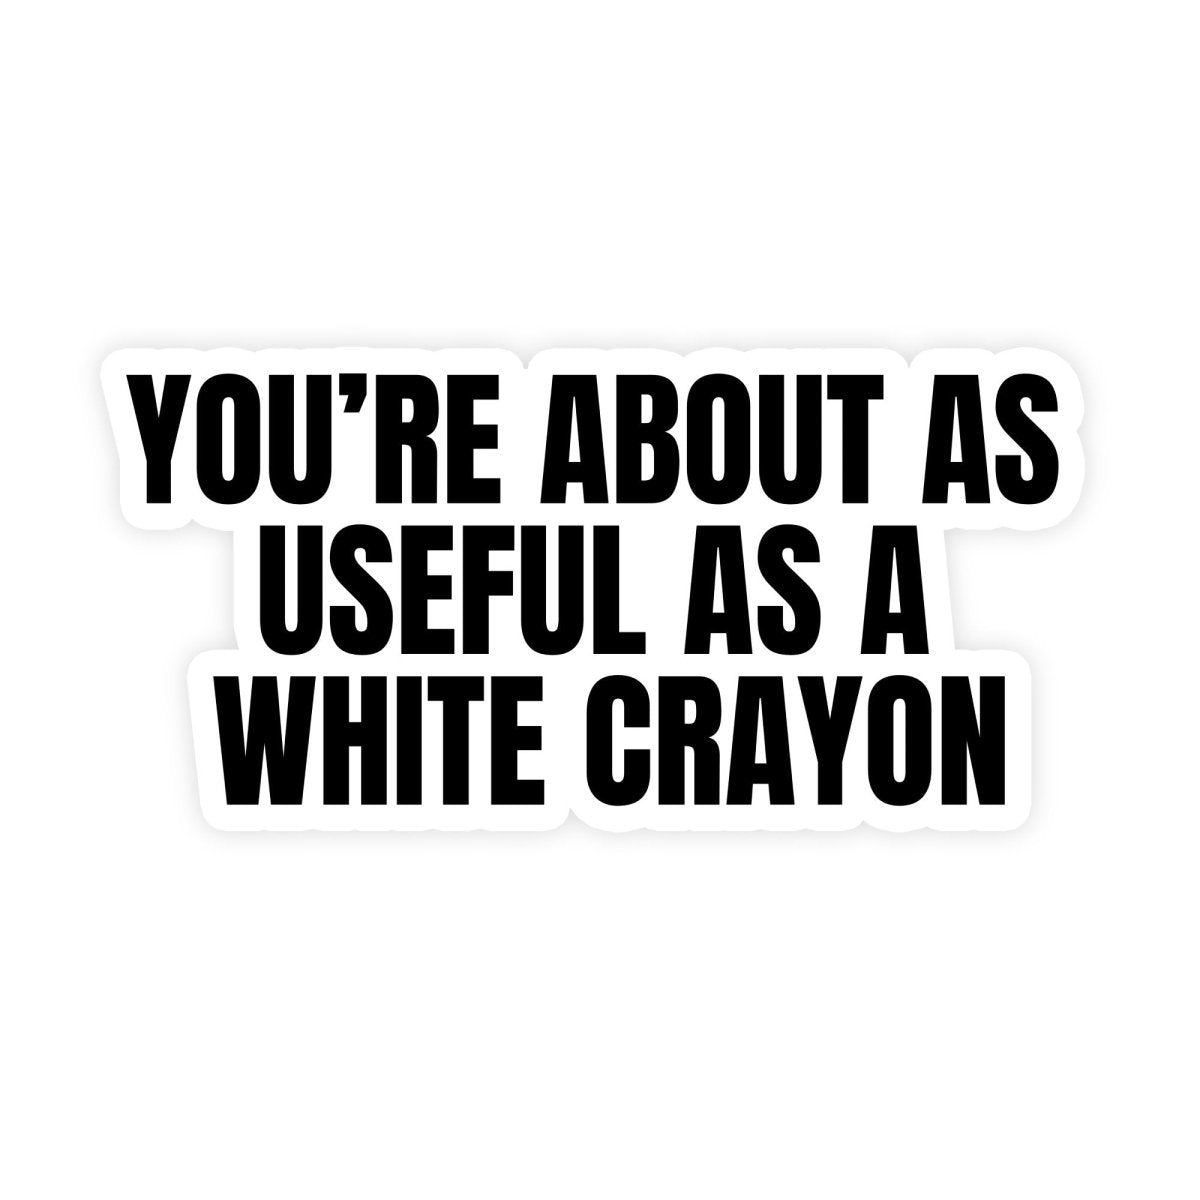 You're About As Dull As A White Crayon Sticker - stickerbullYou're About As Dull As A White Crayon StickerStickersstickerbullstickerbullTaylor_DullWhiteCrayonYou're About As Dull As A White Crayon Sticker